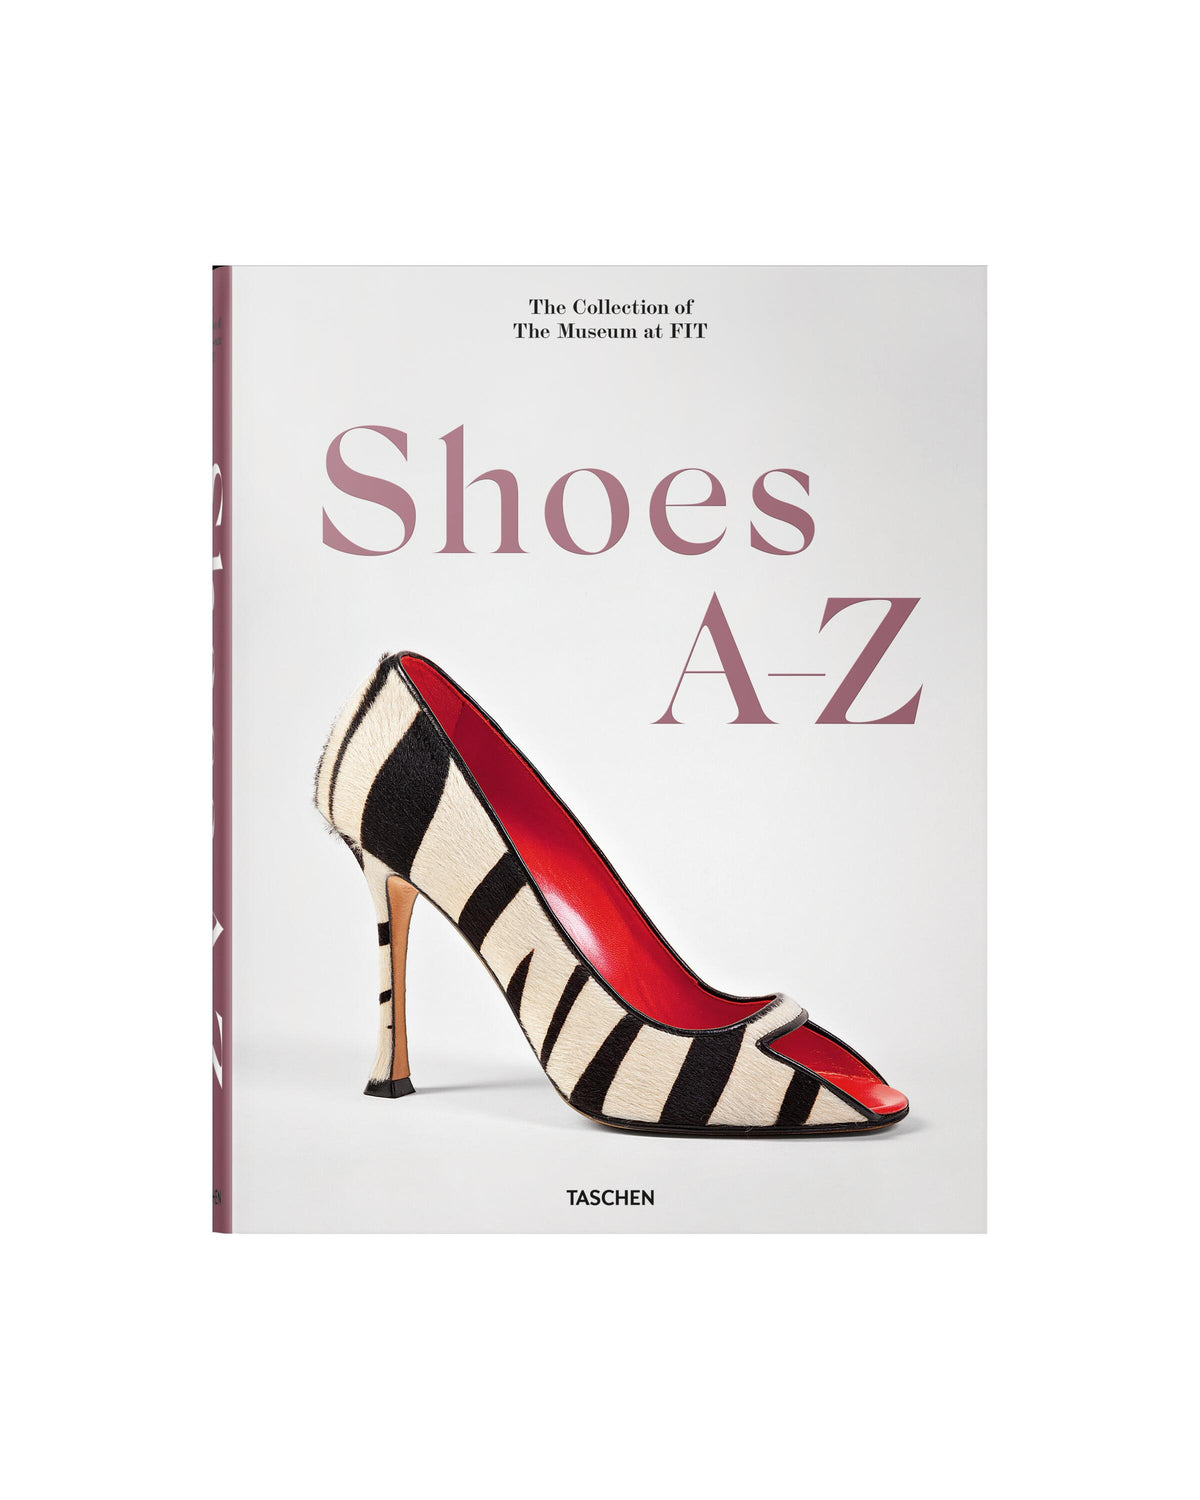 Taschen Verlag Shoes A-Z. The Collection of The Museum at FIT